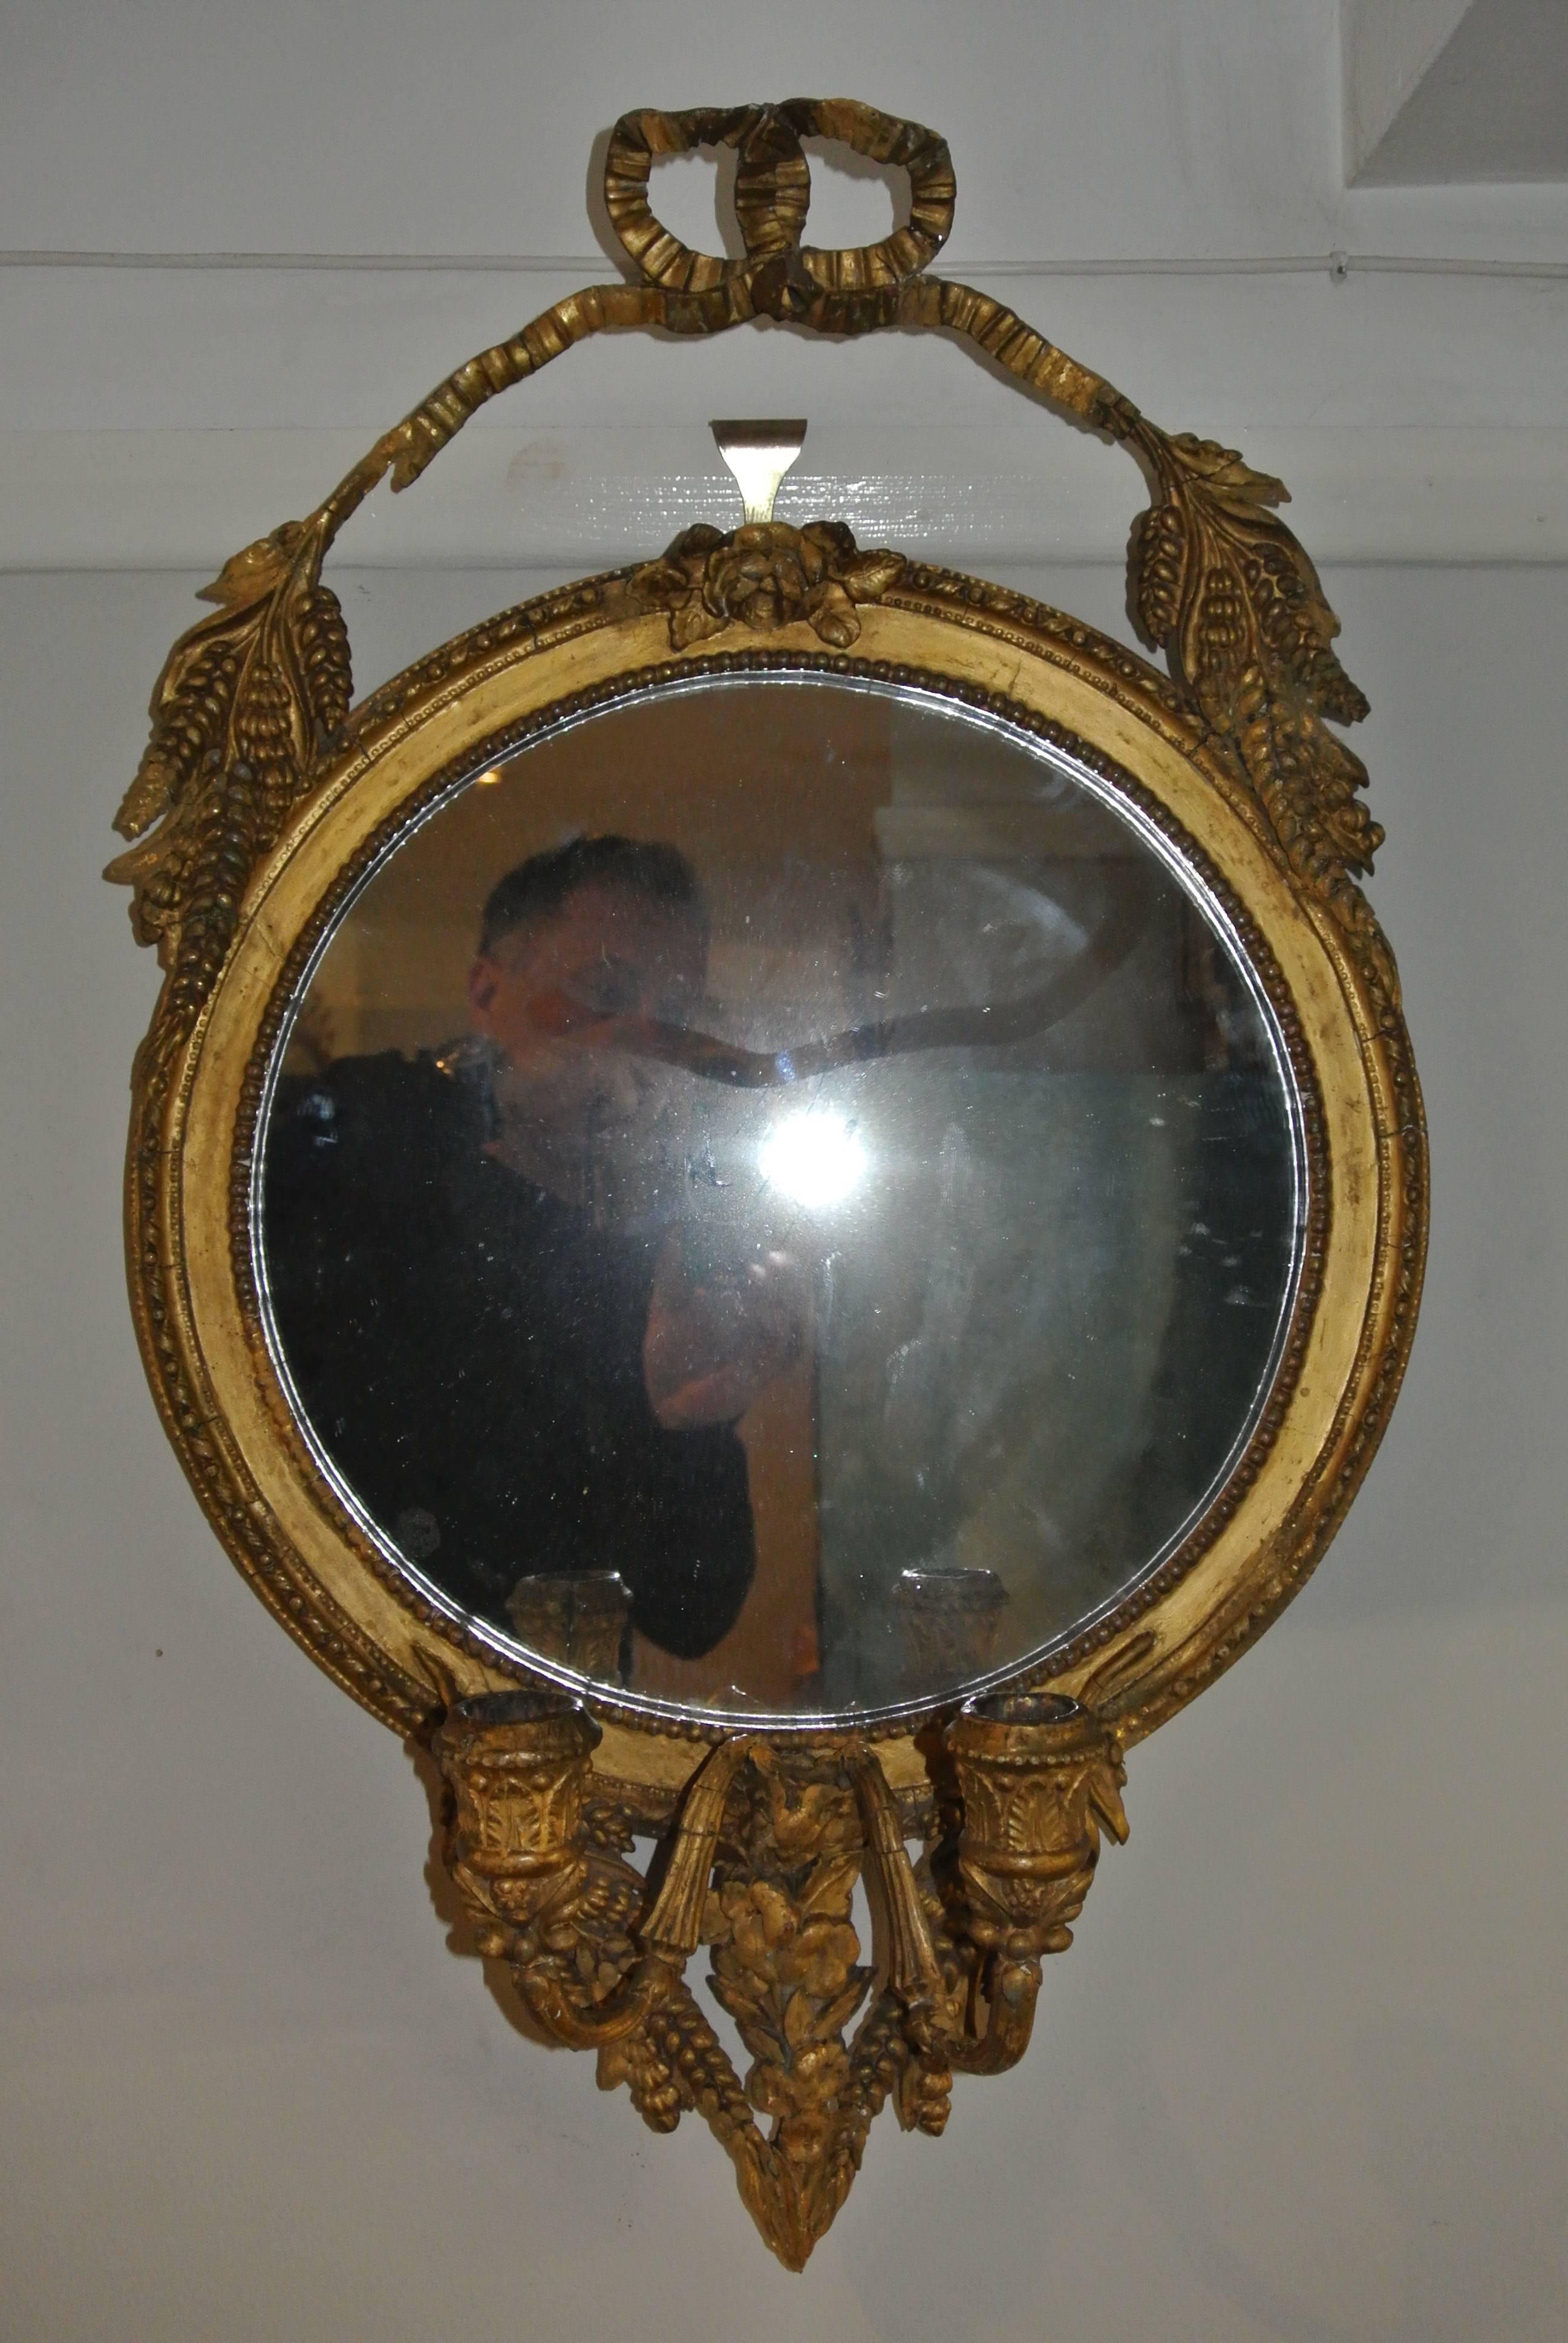 19th Century Pair Of Giltwood And Gesso Circular Girandole Mirrors With Floral And Barley Decoration. In Original Condition.